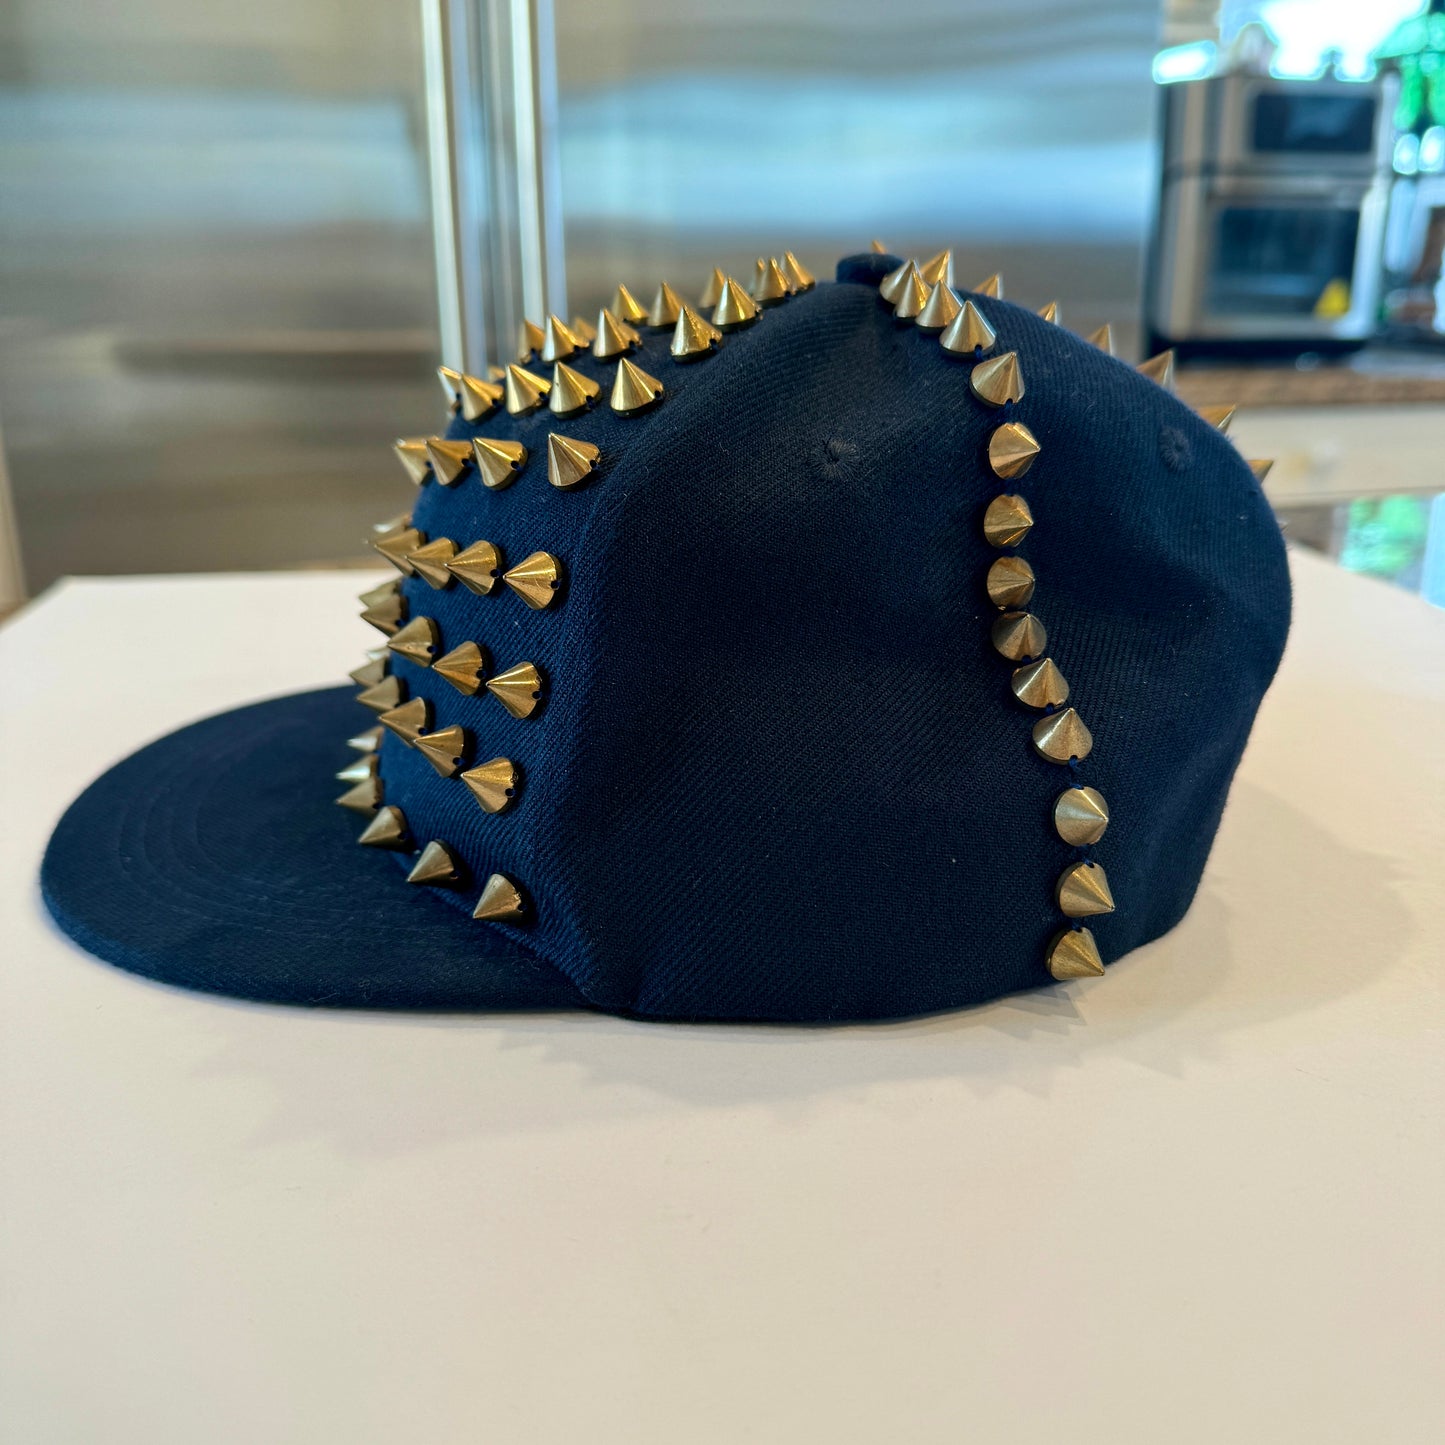 Studded Navy Blue Hat with Gold Spike Stude hand sewn — Preowned / Used